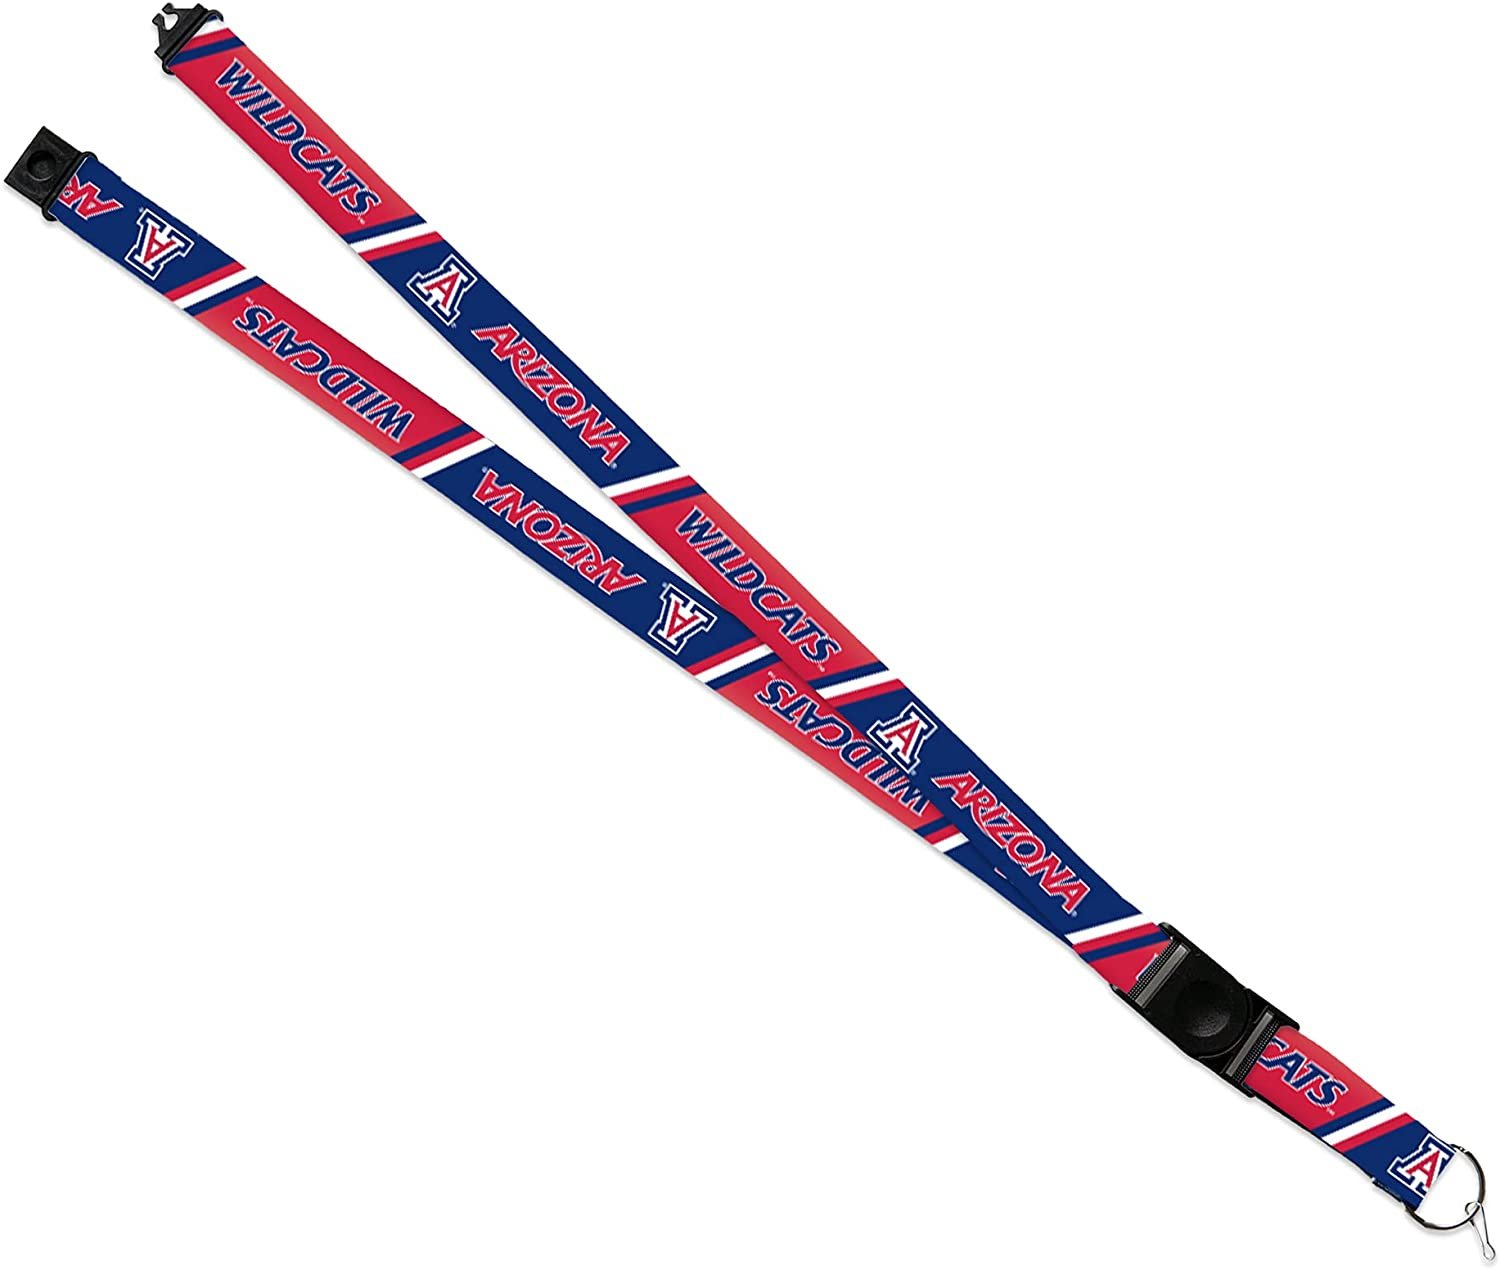 University of Arizona Wildcats Lanyard Keychain Double Sided 18 Inch Button Clip Safety Breakaway